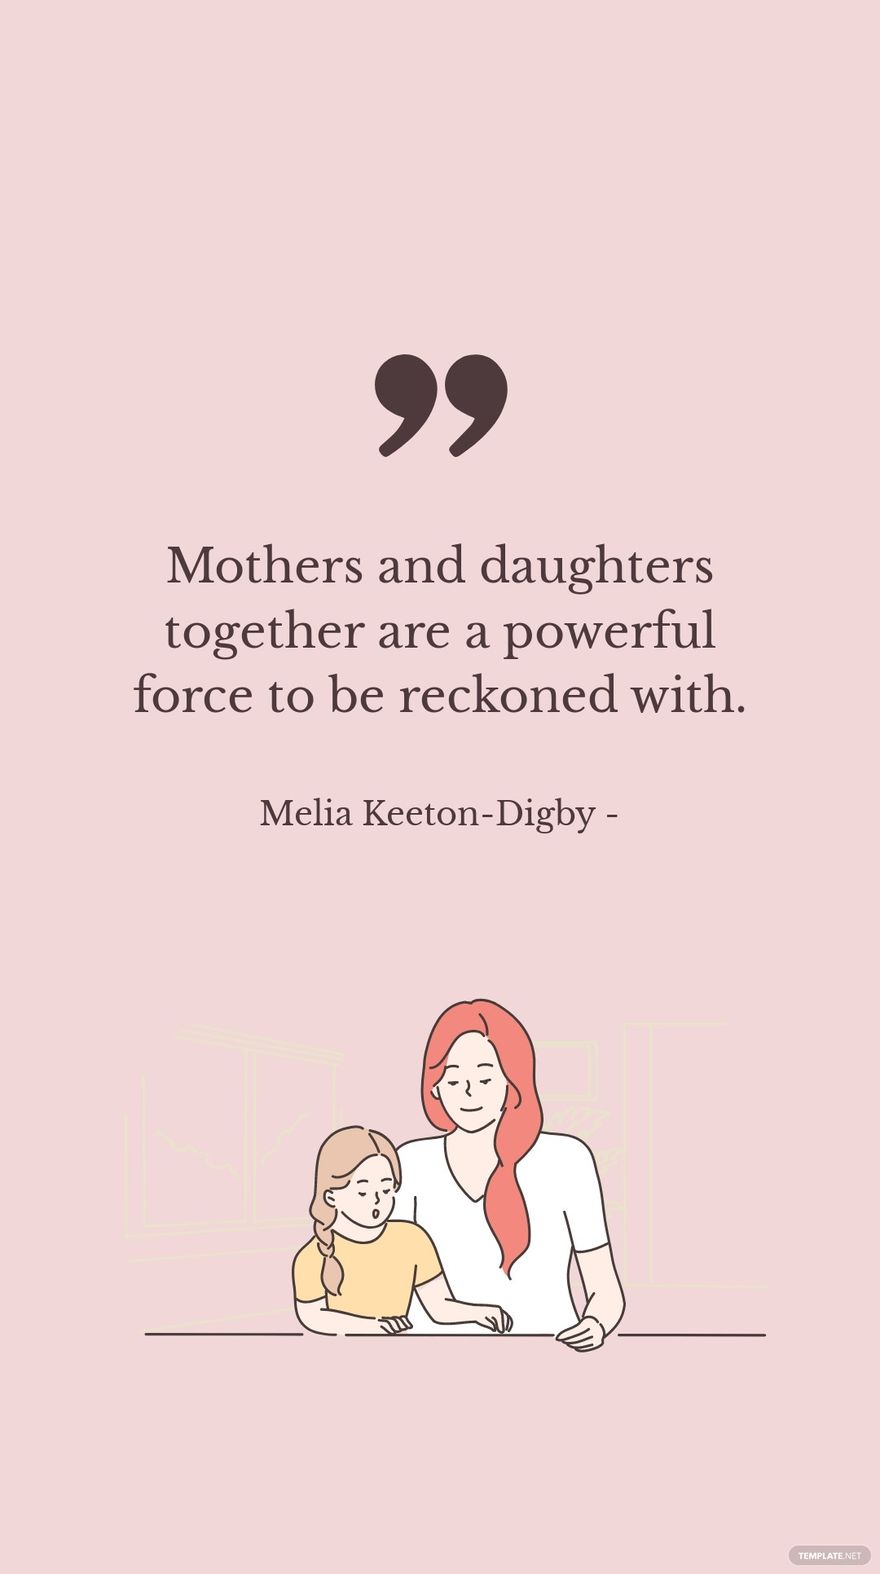 Melia Keeton-Digby - Mothers and daughters together are a powerful force to be reckoned with.